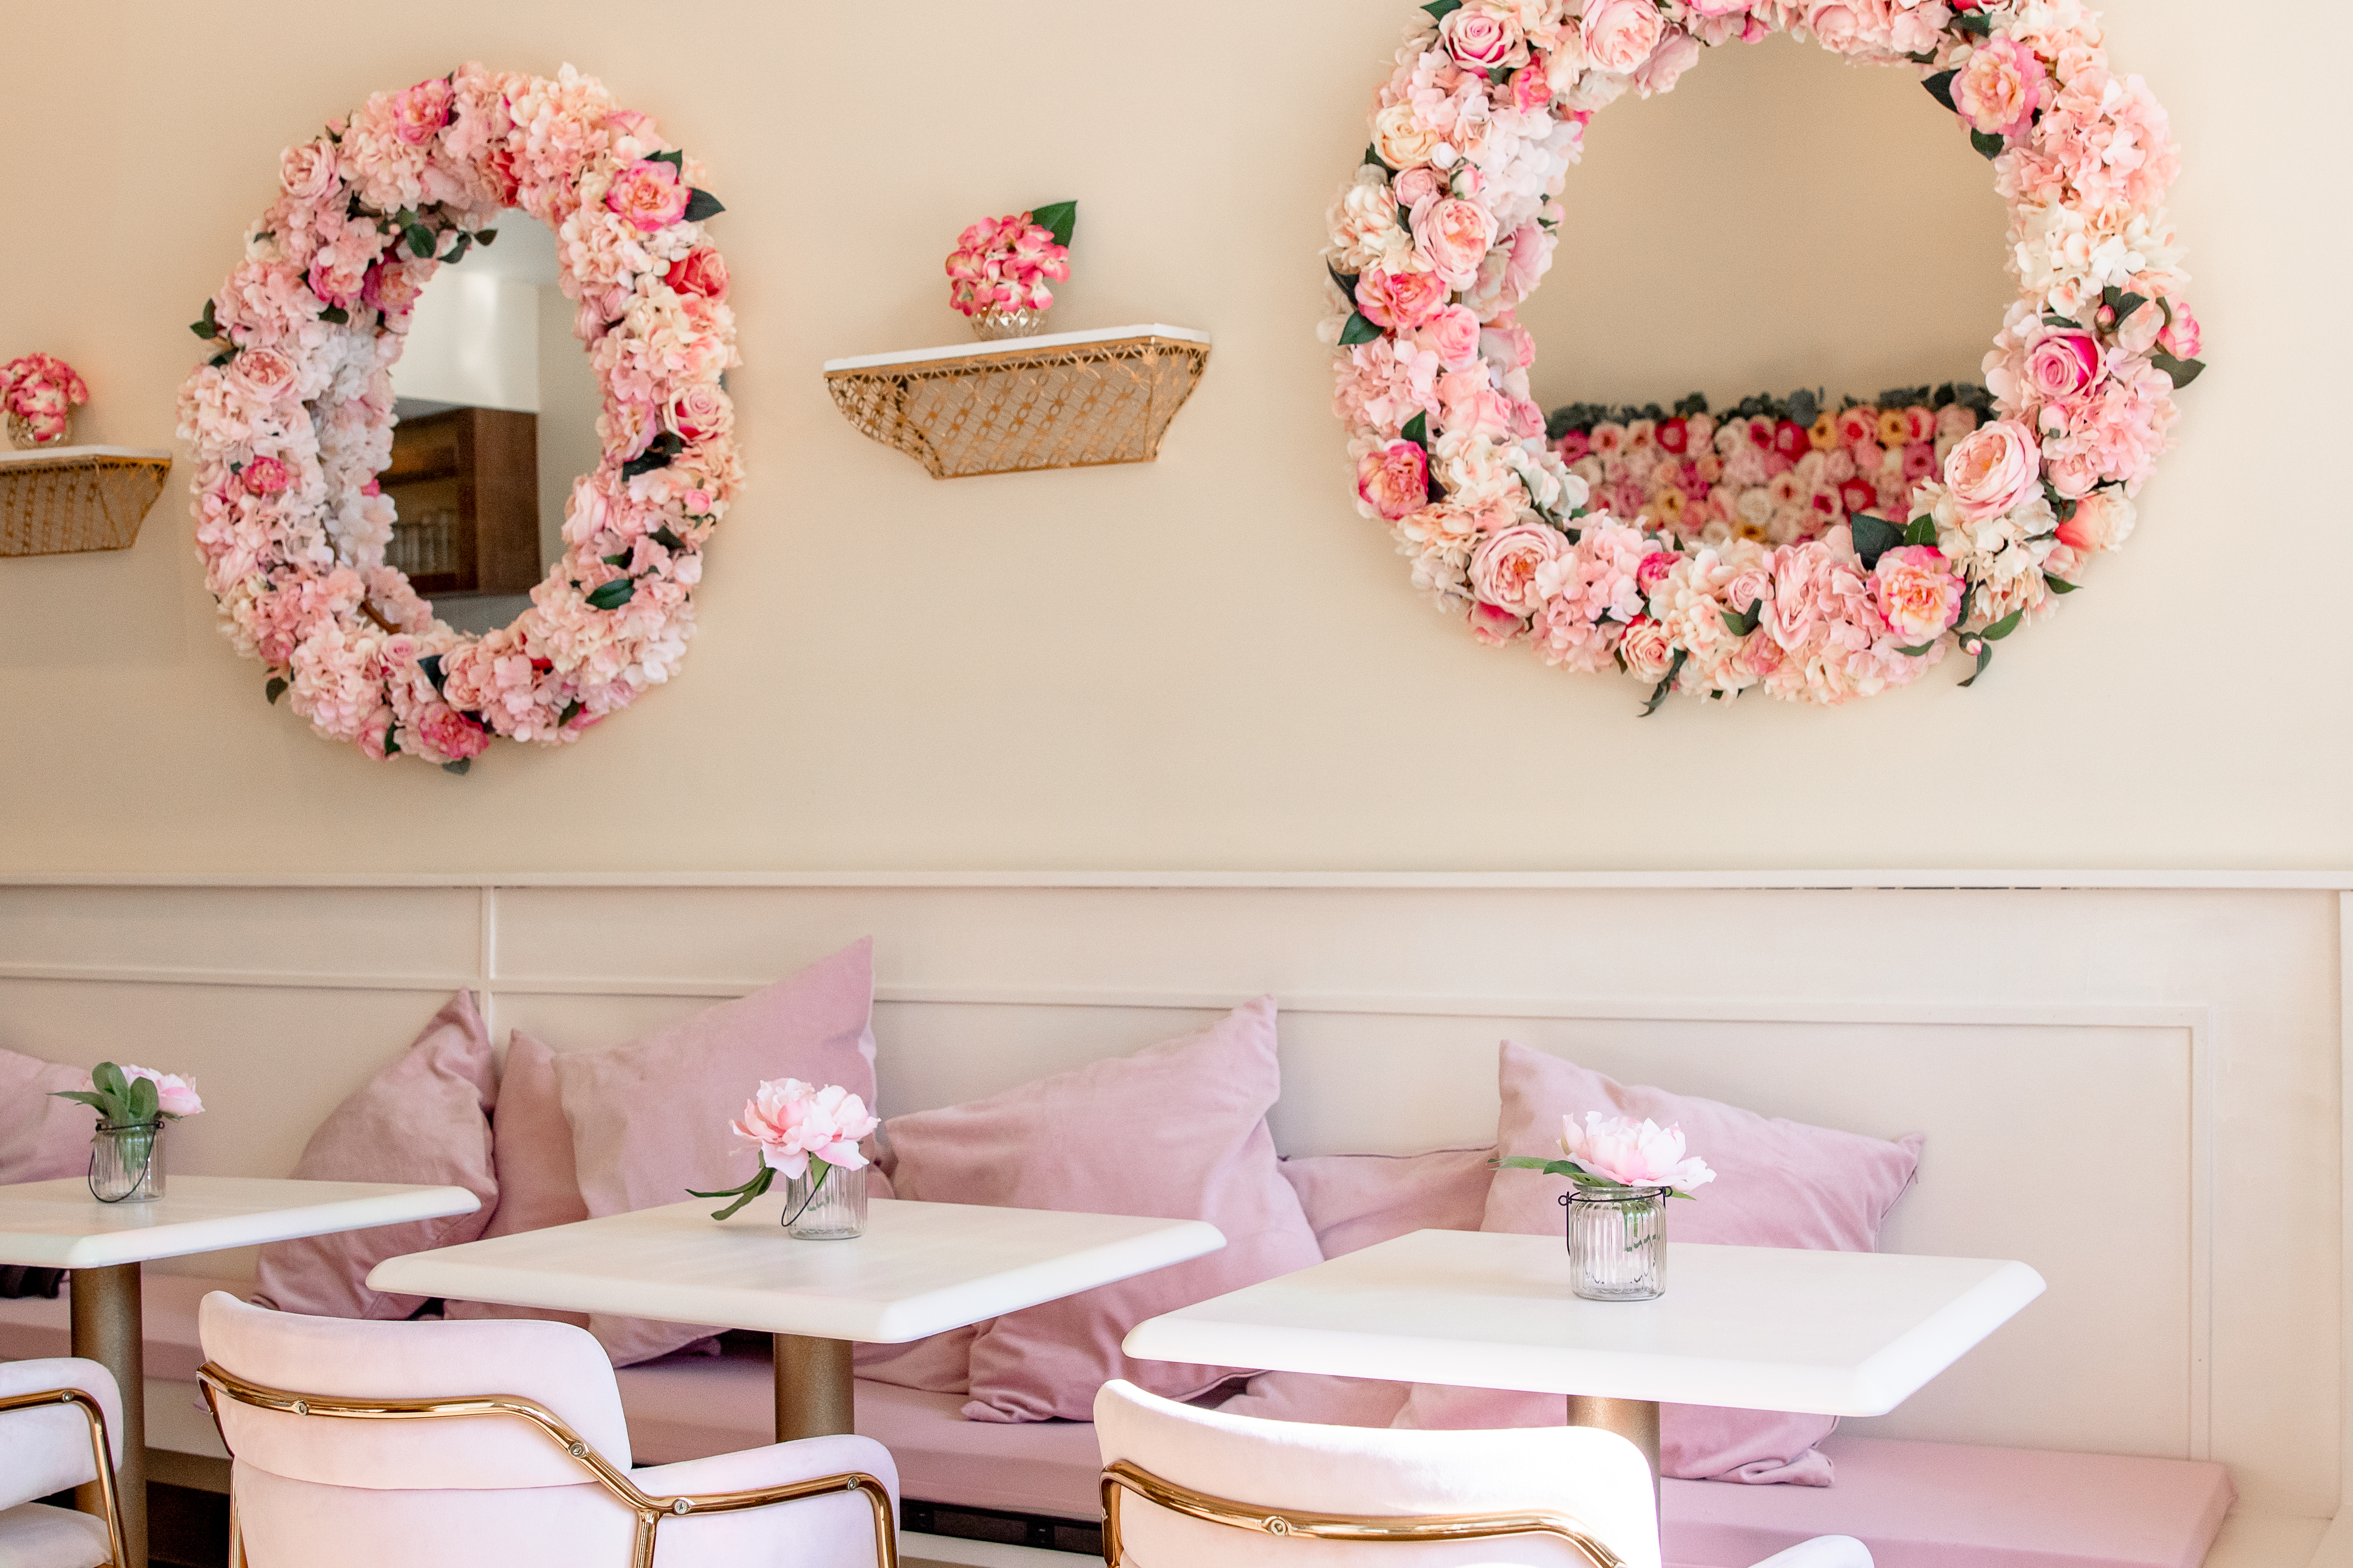 The creamy walls are offset by pale pink pillows on a pink velvet bench, and white tables are flanked by pale pink velvet and gold chairs